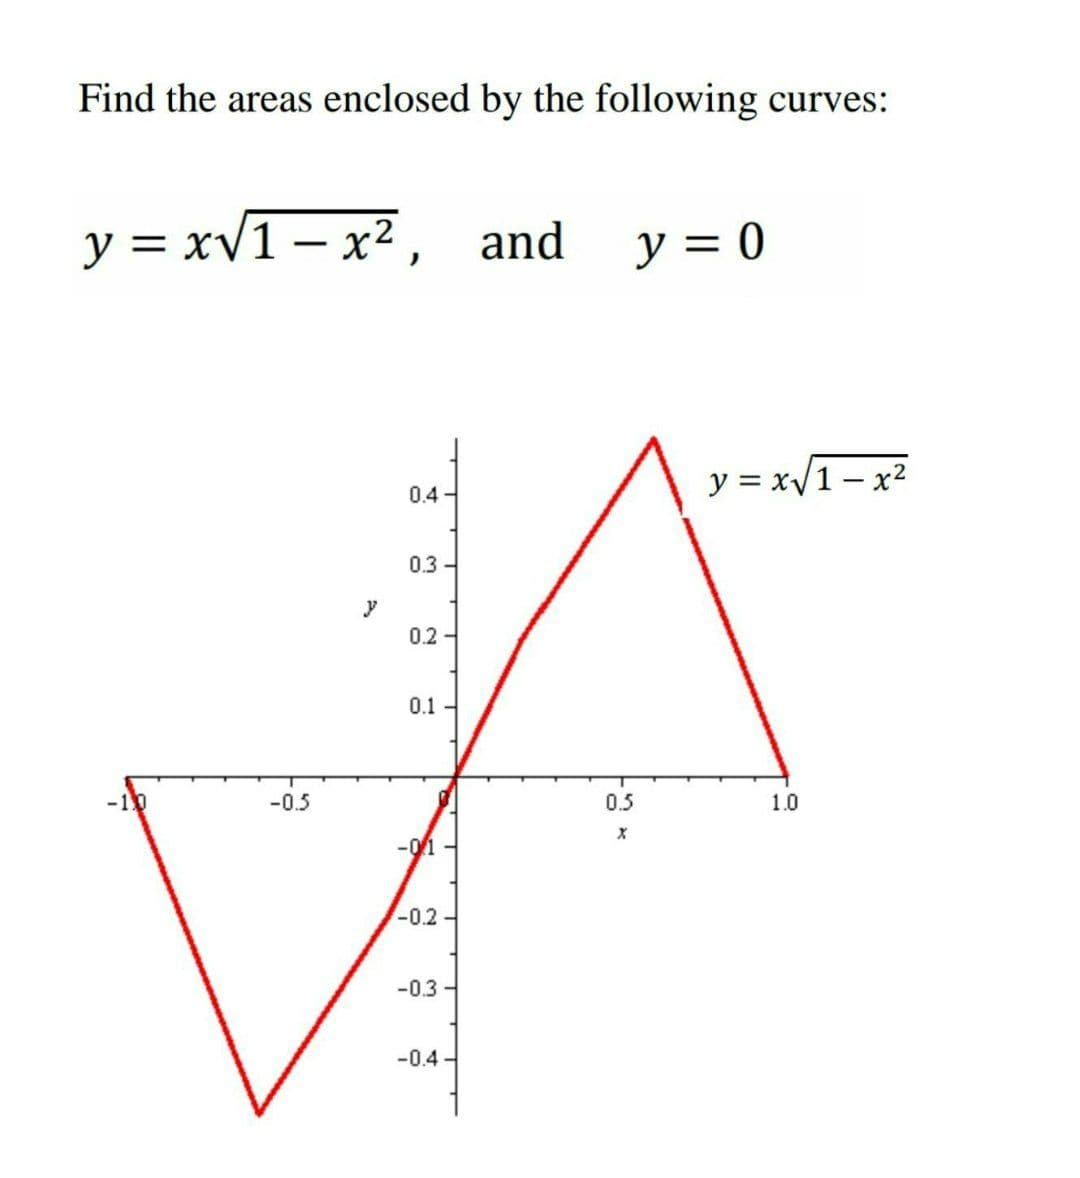 Find the areas enclosed by the following curves:
y = xv1– x², and
y = 0
XV
y = x/1 – x2
0.4-
0.3-
y
0.2-
0.1 -
10
-0.5
0.5
1.0
-01
-0.2 -
-0.3 -
-0.4 -
